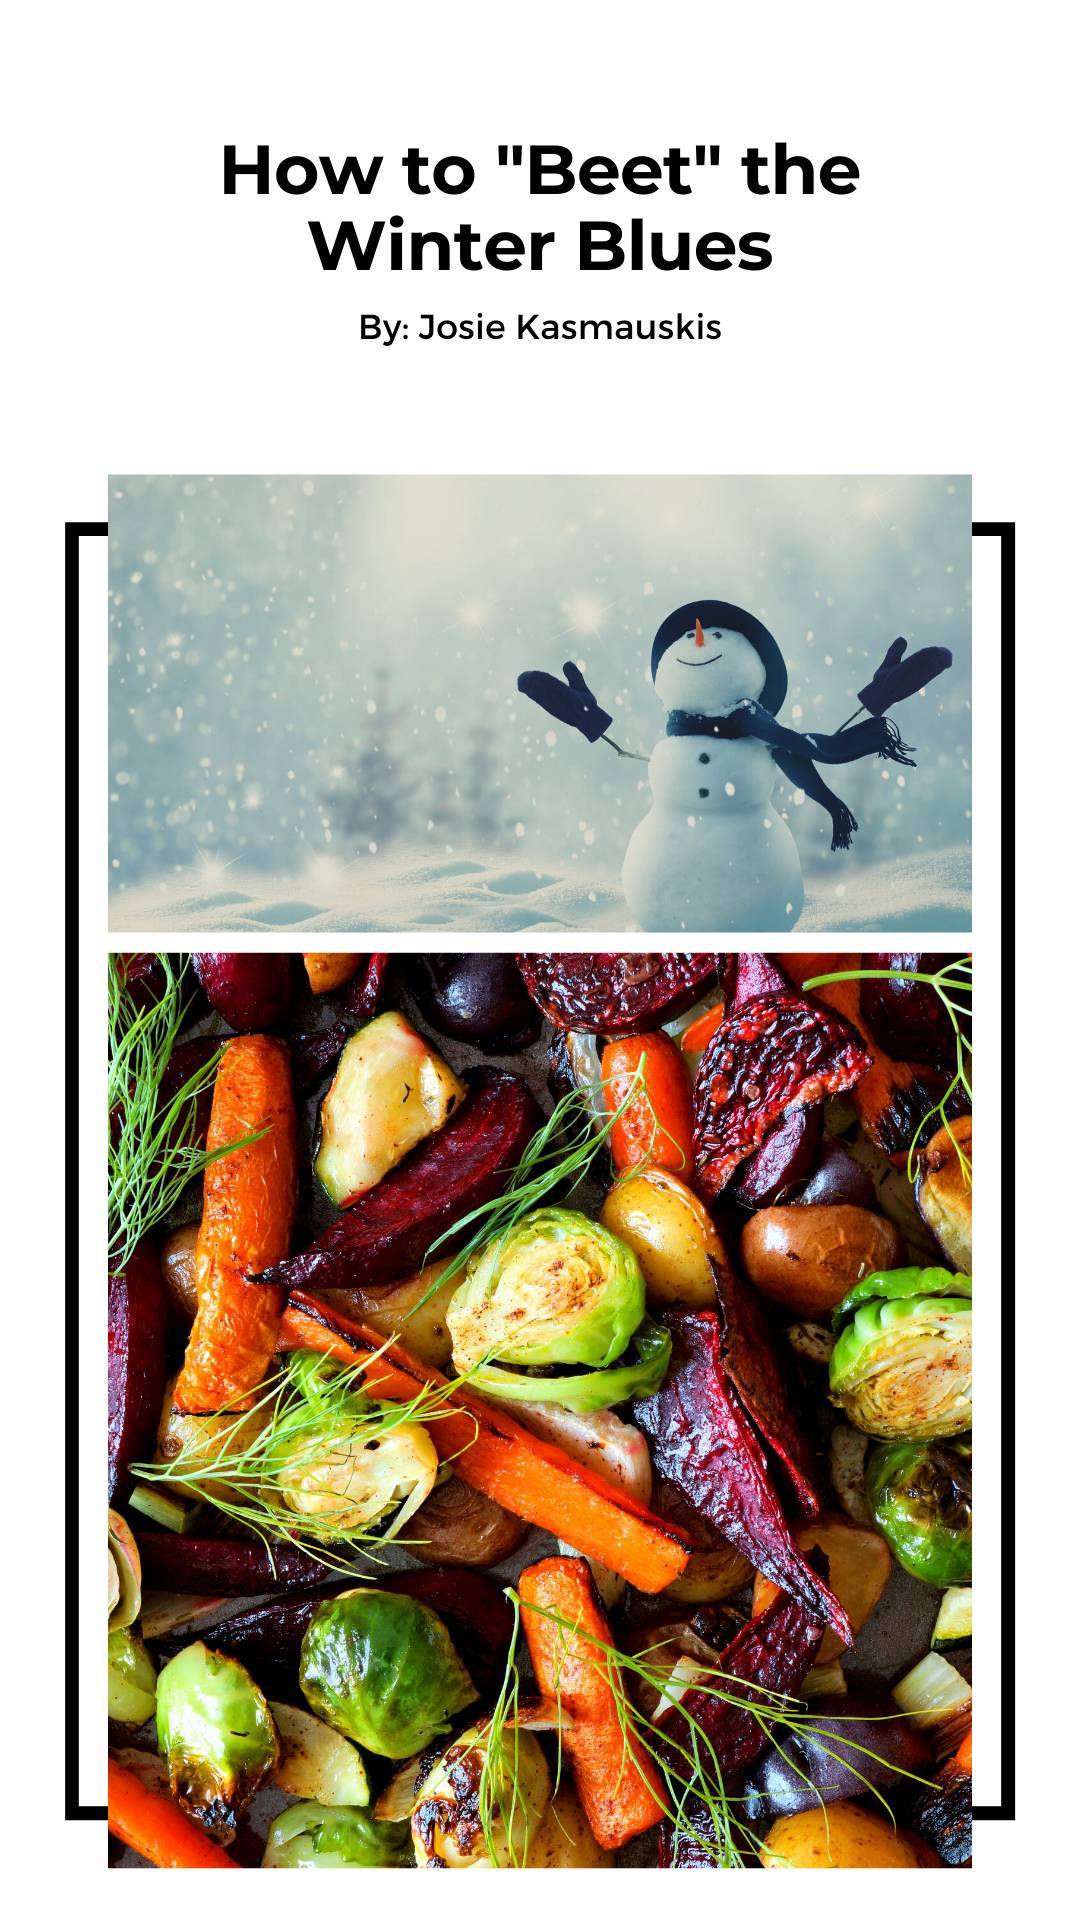 How to "Beet" the Winter Blues by Josie Kasmaukis, image of a snowman and roasted vegetables.